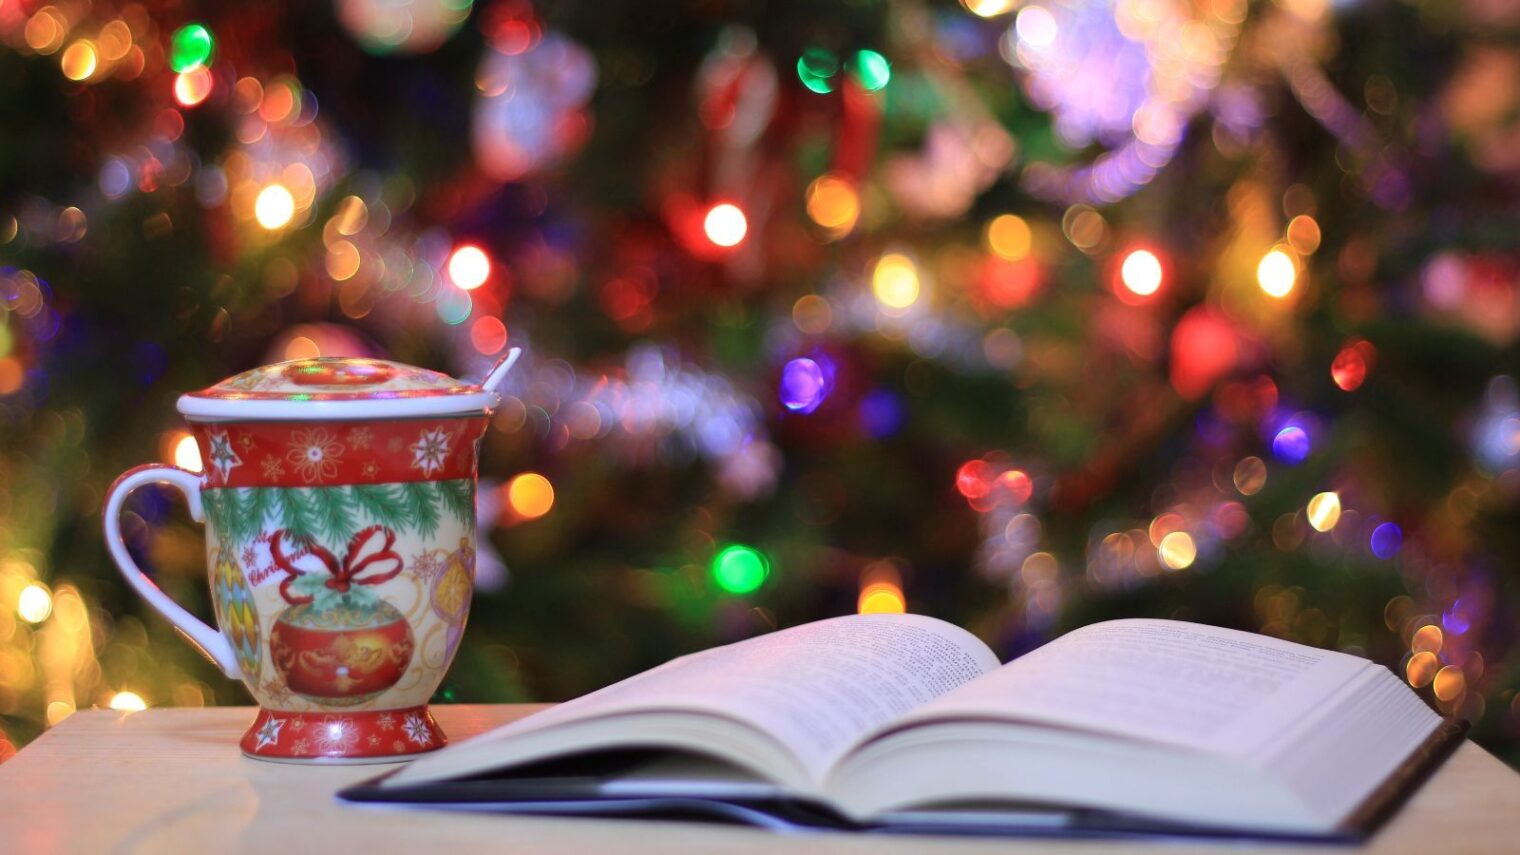 Curl up with a good book this holiday season to make it perfectly complete. Photo by Andreea Radu on Unsplash